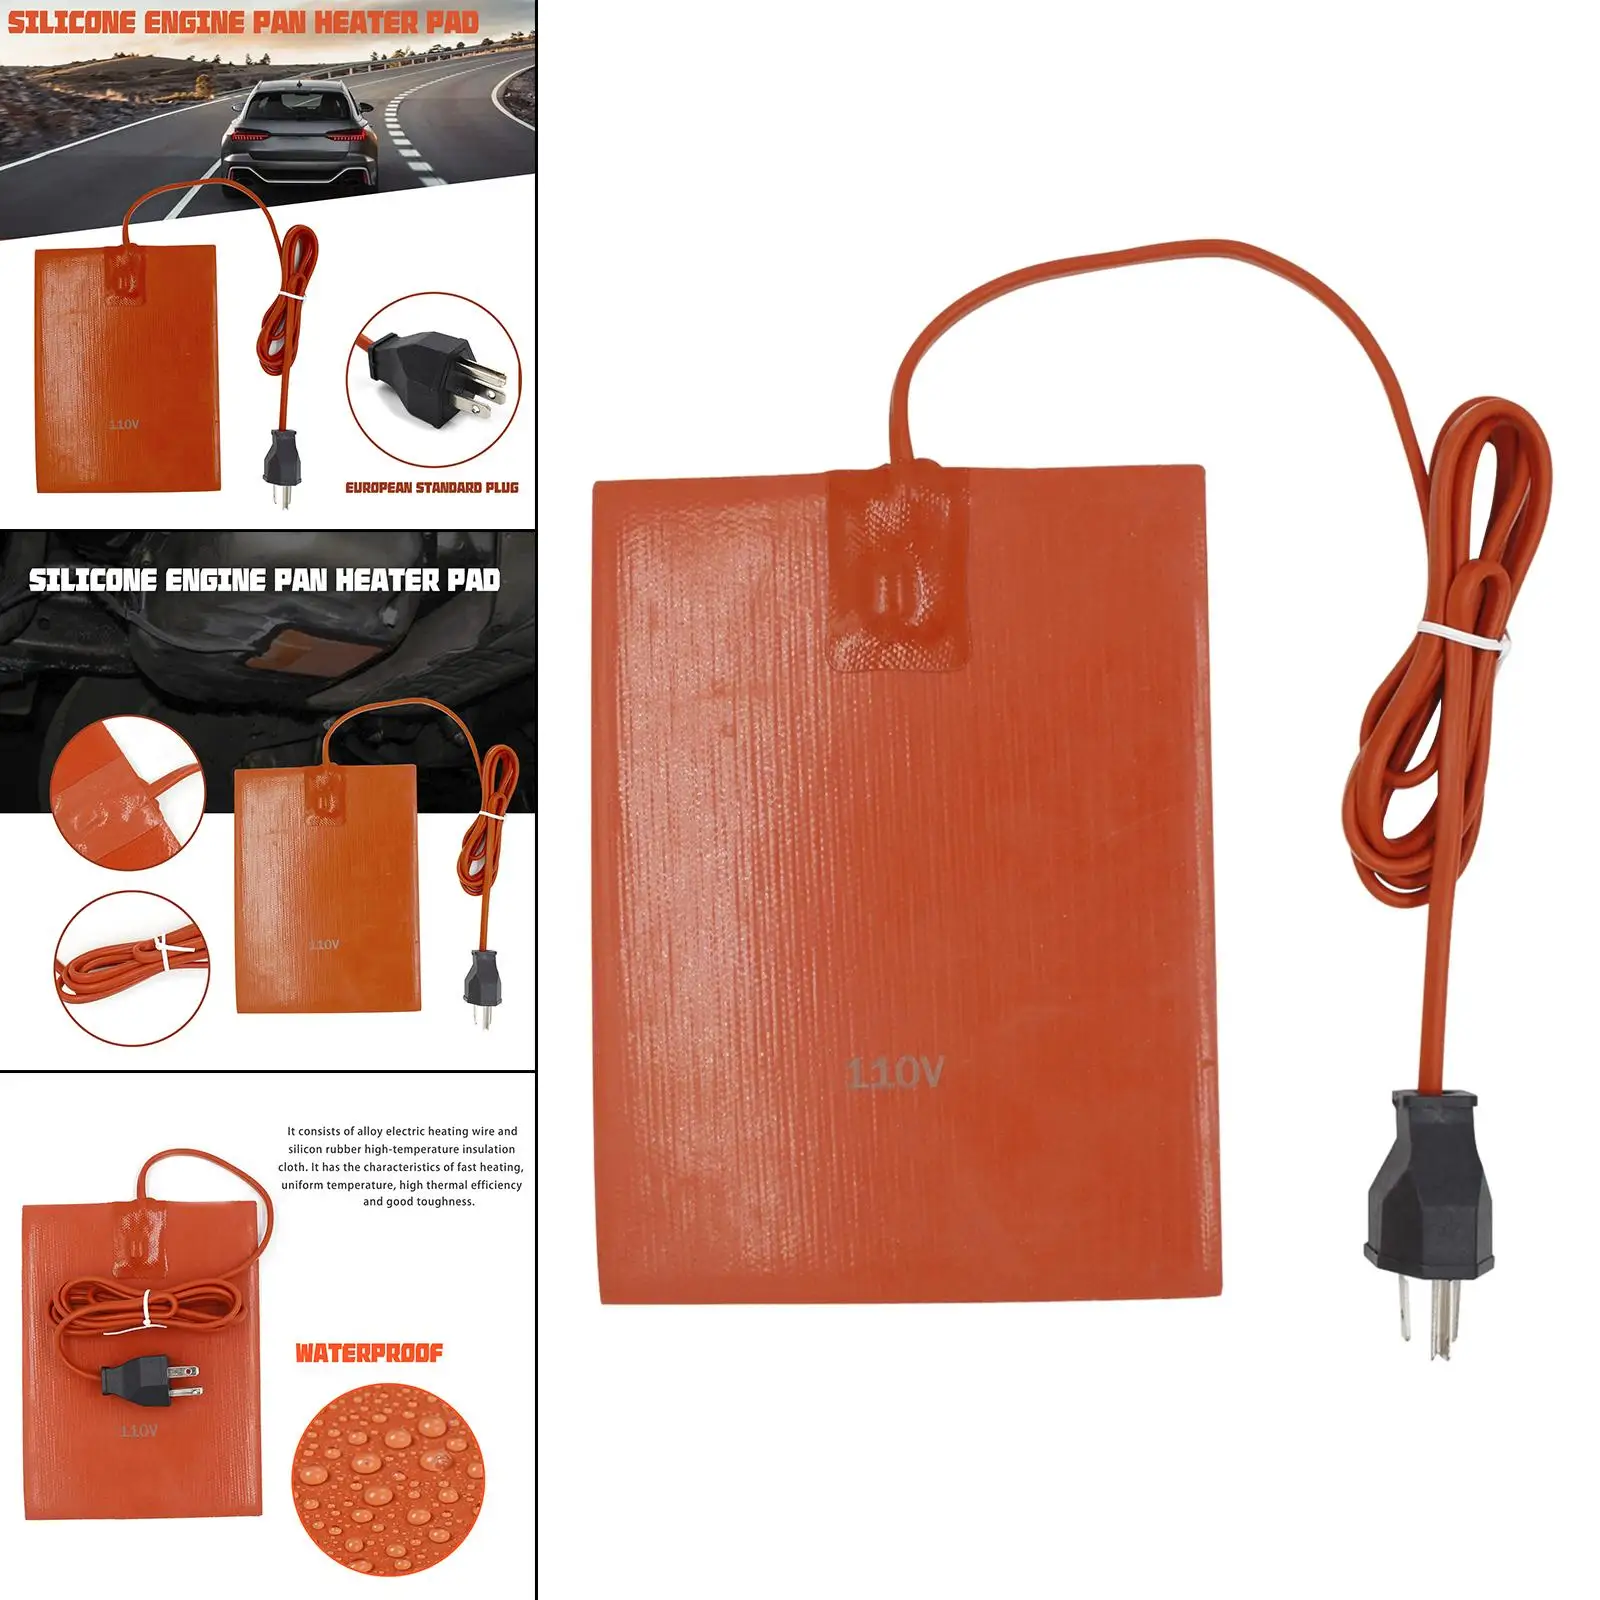 Car Engine Heating Oil Pan Heater Pad 15x20cm Oil Fuel Tank Engine Block Silicone Heating Pad Cord Hot Pad 110V US